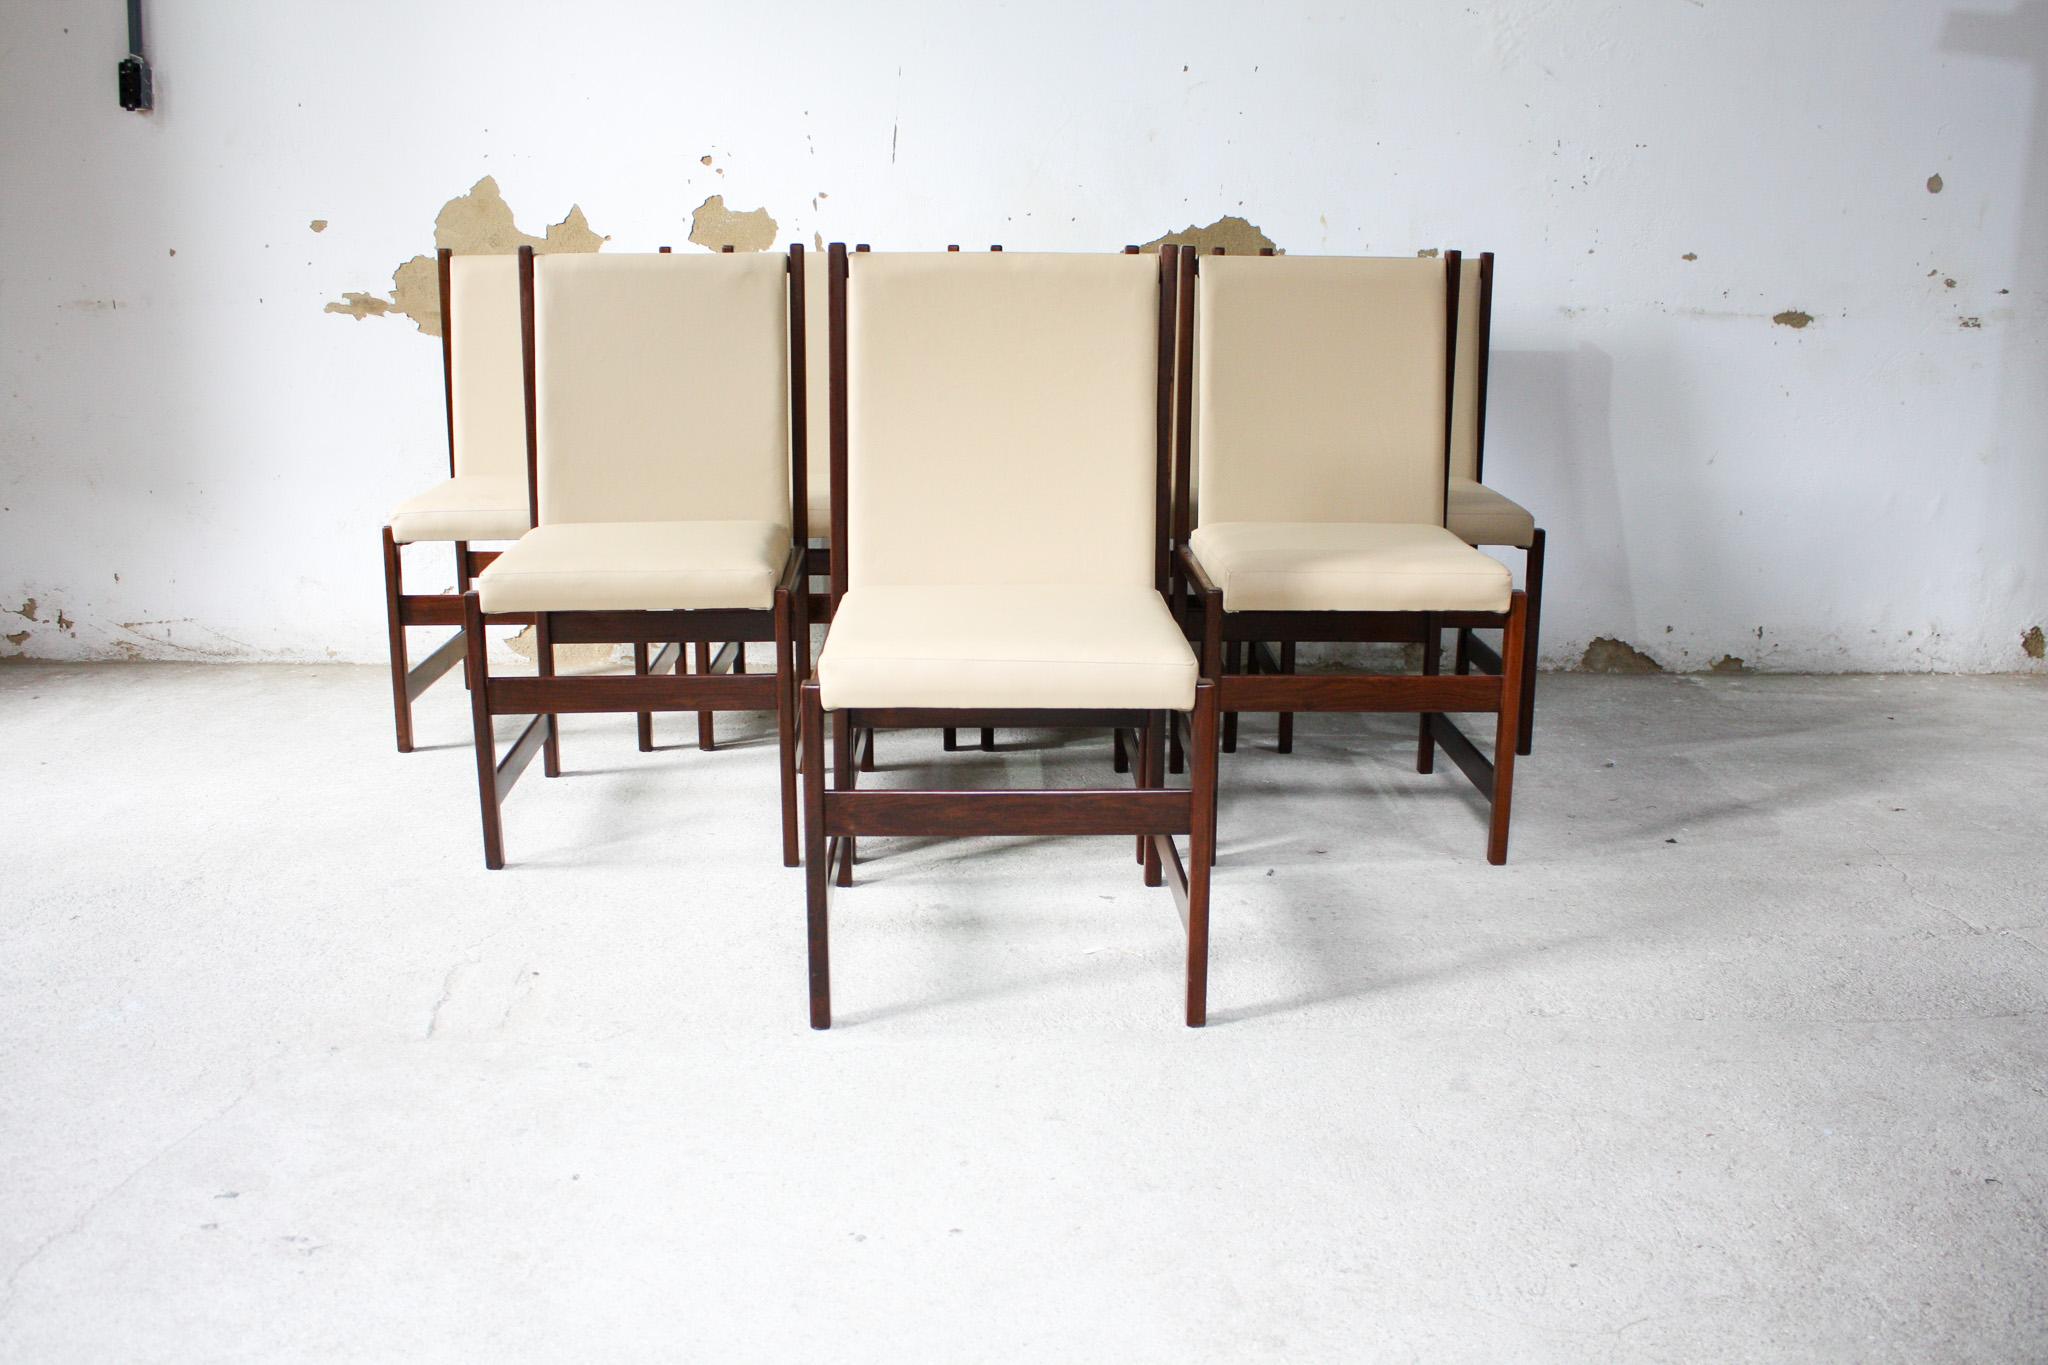 Available today, this spectacular Brazilian Modern eight dining chair set made in hardwood and beige leather by Celina Decoracoes, in the sixties is nothing less than spectacular.
 
Each chair features a Brazilian Rosewood, known as Jacaranda,